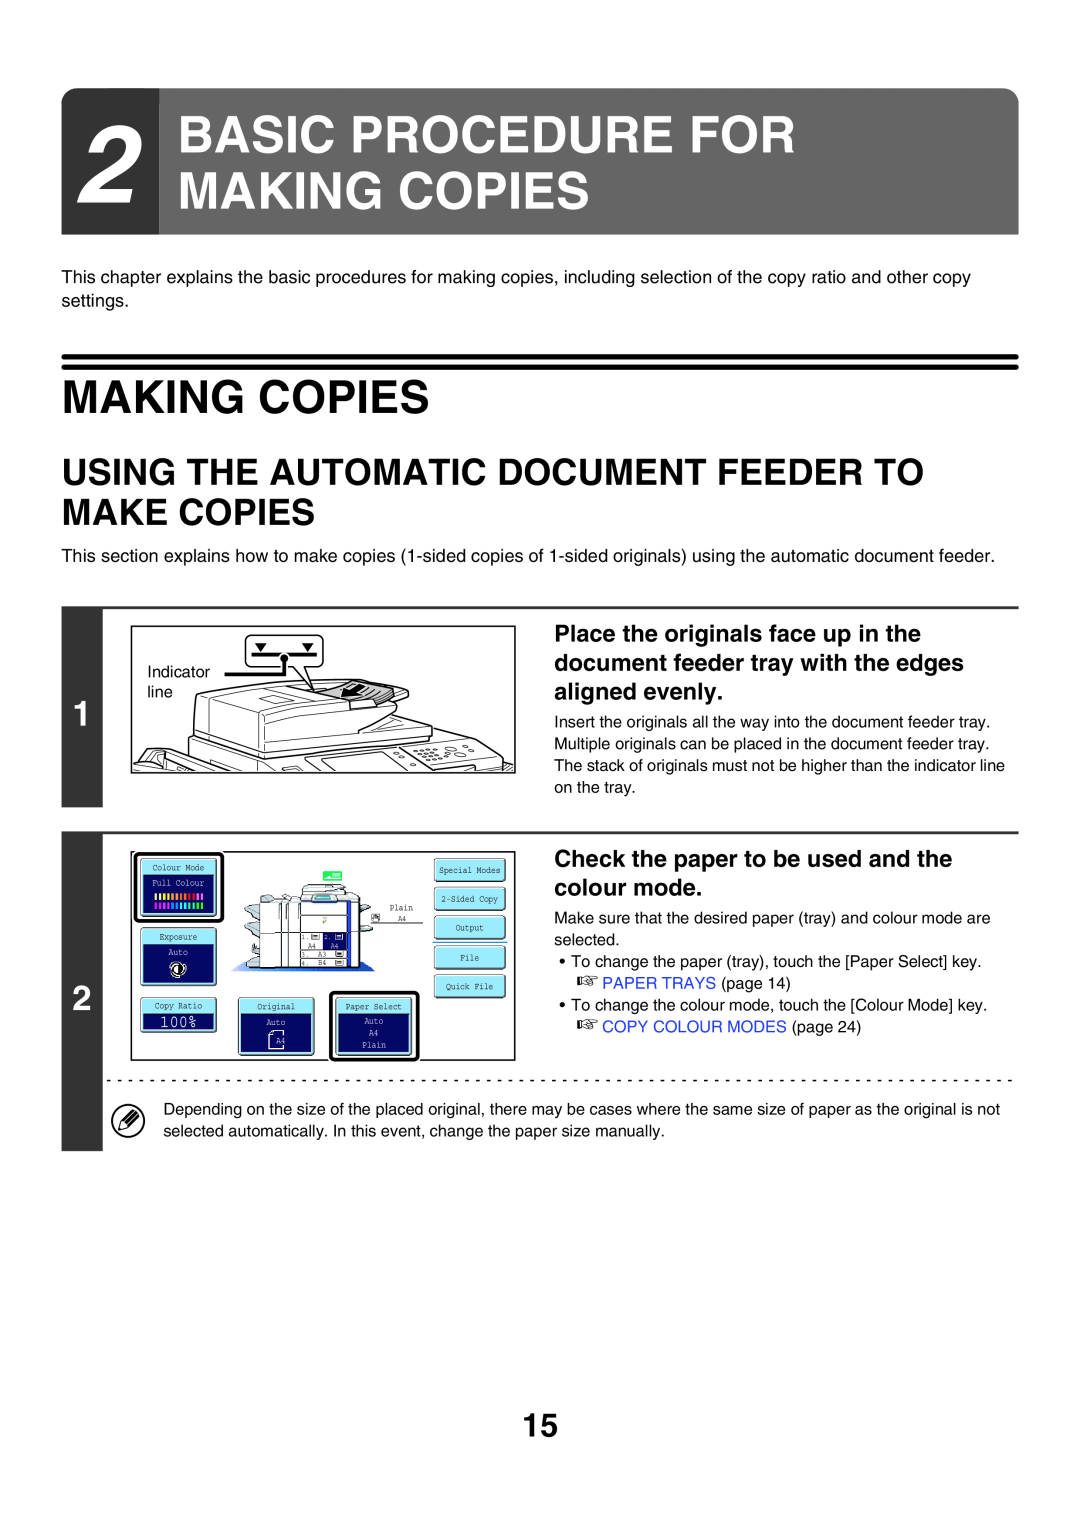 Sharp MX-6200N, MX-7000N manual Basic Procedure For Making Copies, Using The Automatic Document Feeder To Make Copies, 100% 